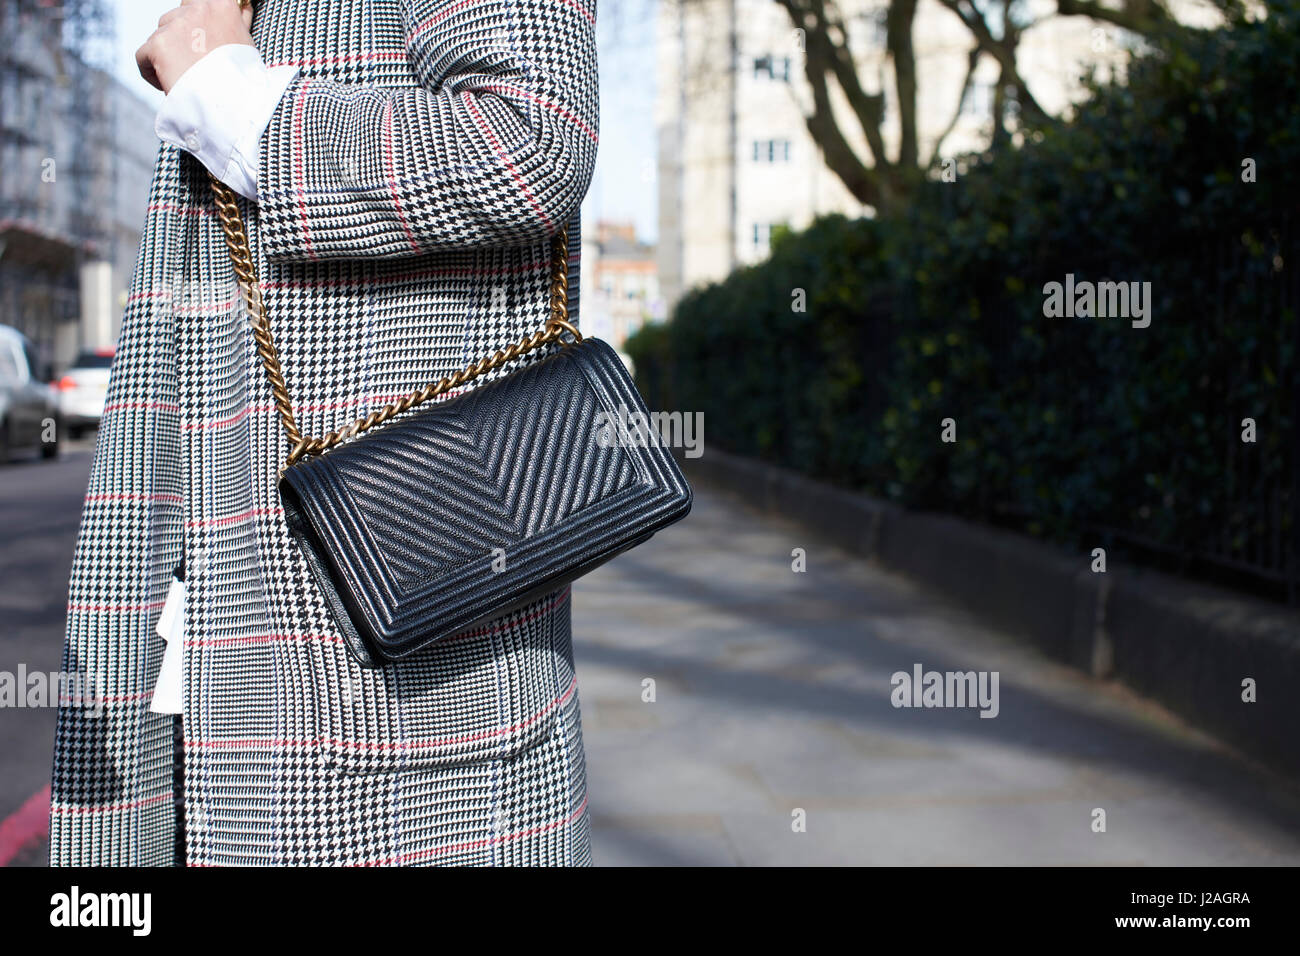 LONDON - FEBRUARY, 2017: Mid section of woman wearing Prince of Wales check coat and black Chanel cross body handbag standing in street during London Fashion Week Stock Photo